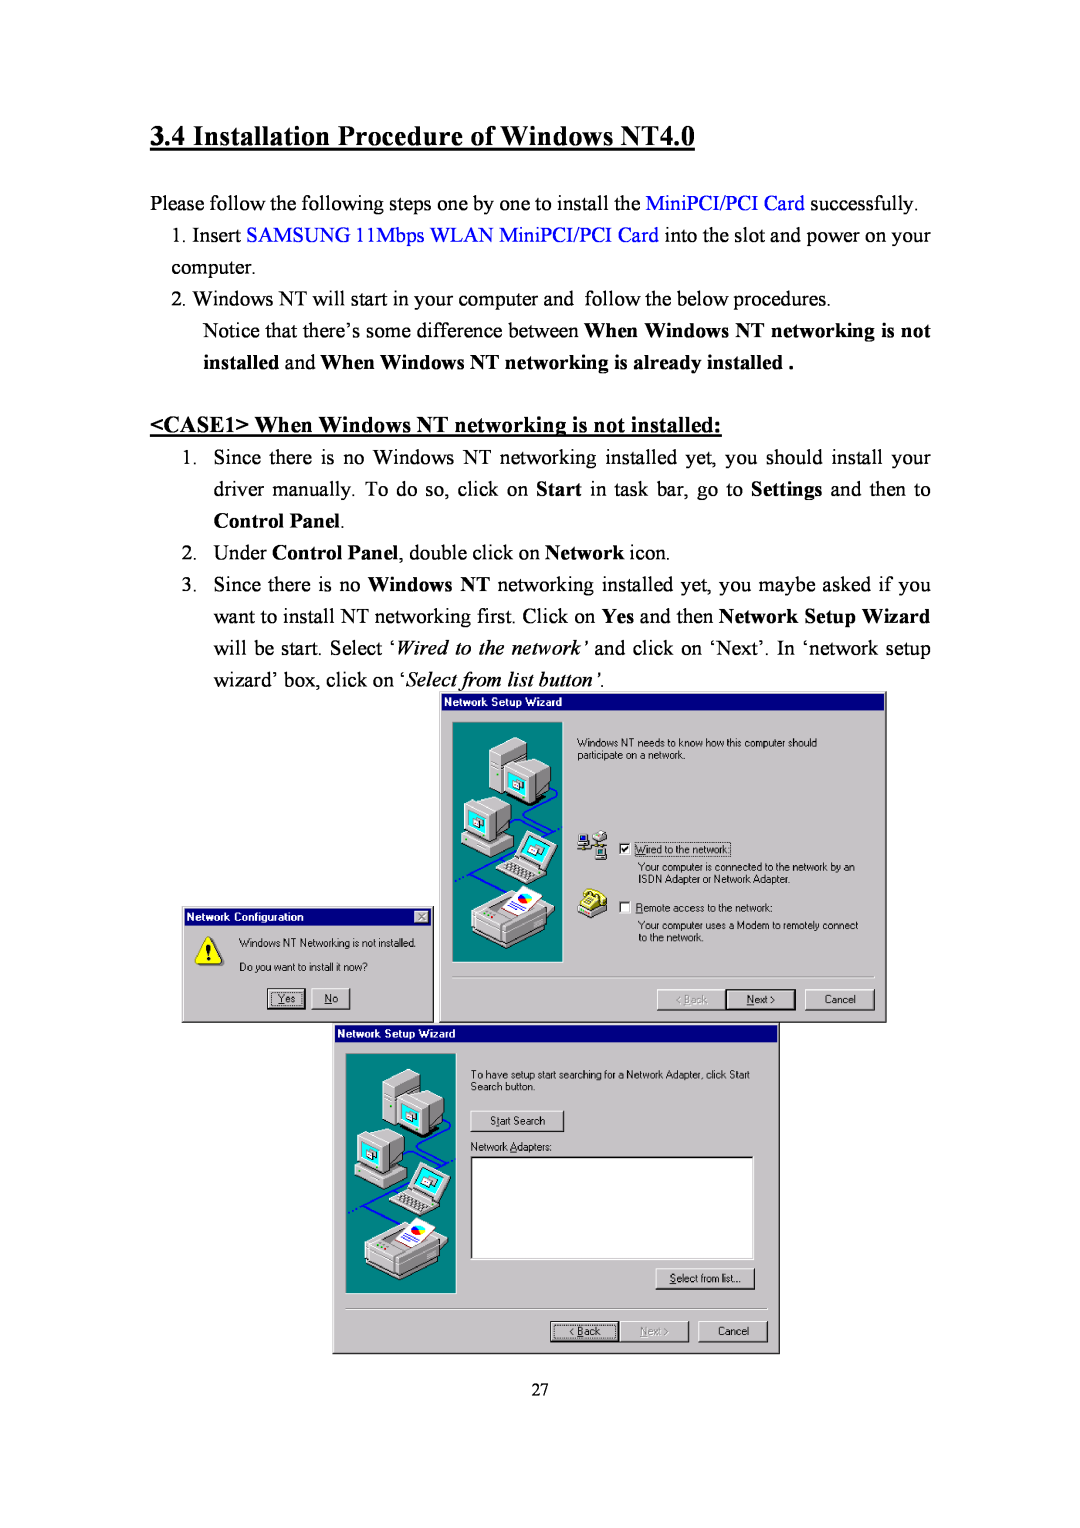 Samsung SWL-2210P, SWL-2210M Installation Procedure of Windows NT4.0, CASE1 When Windows NT networking is not installed 